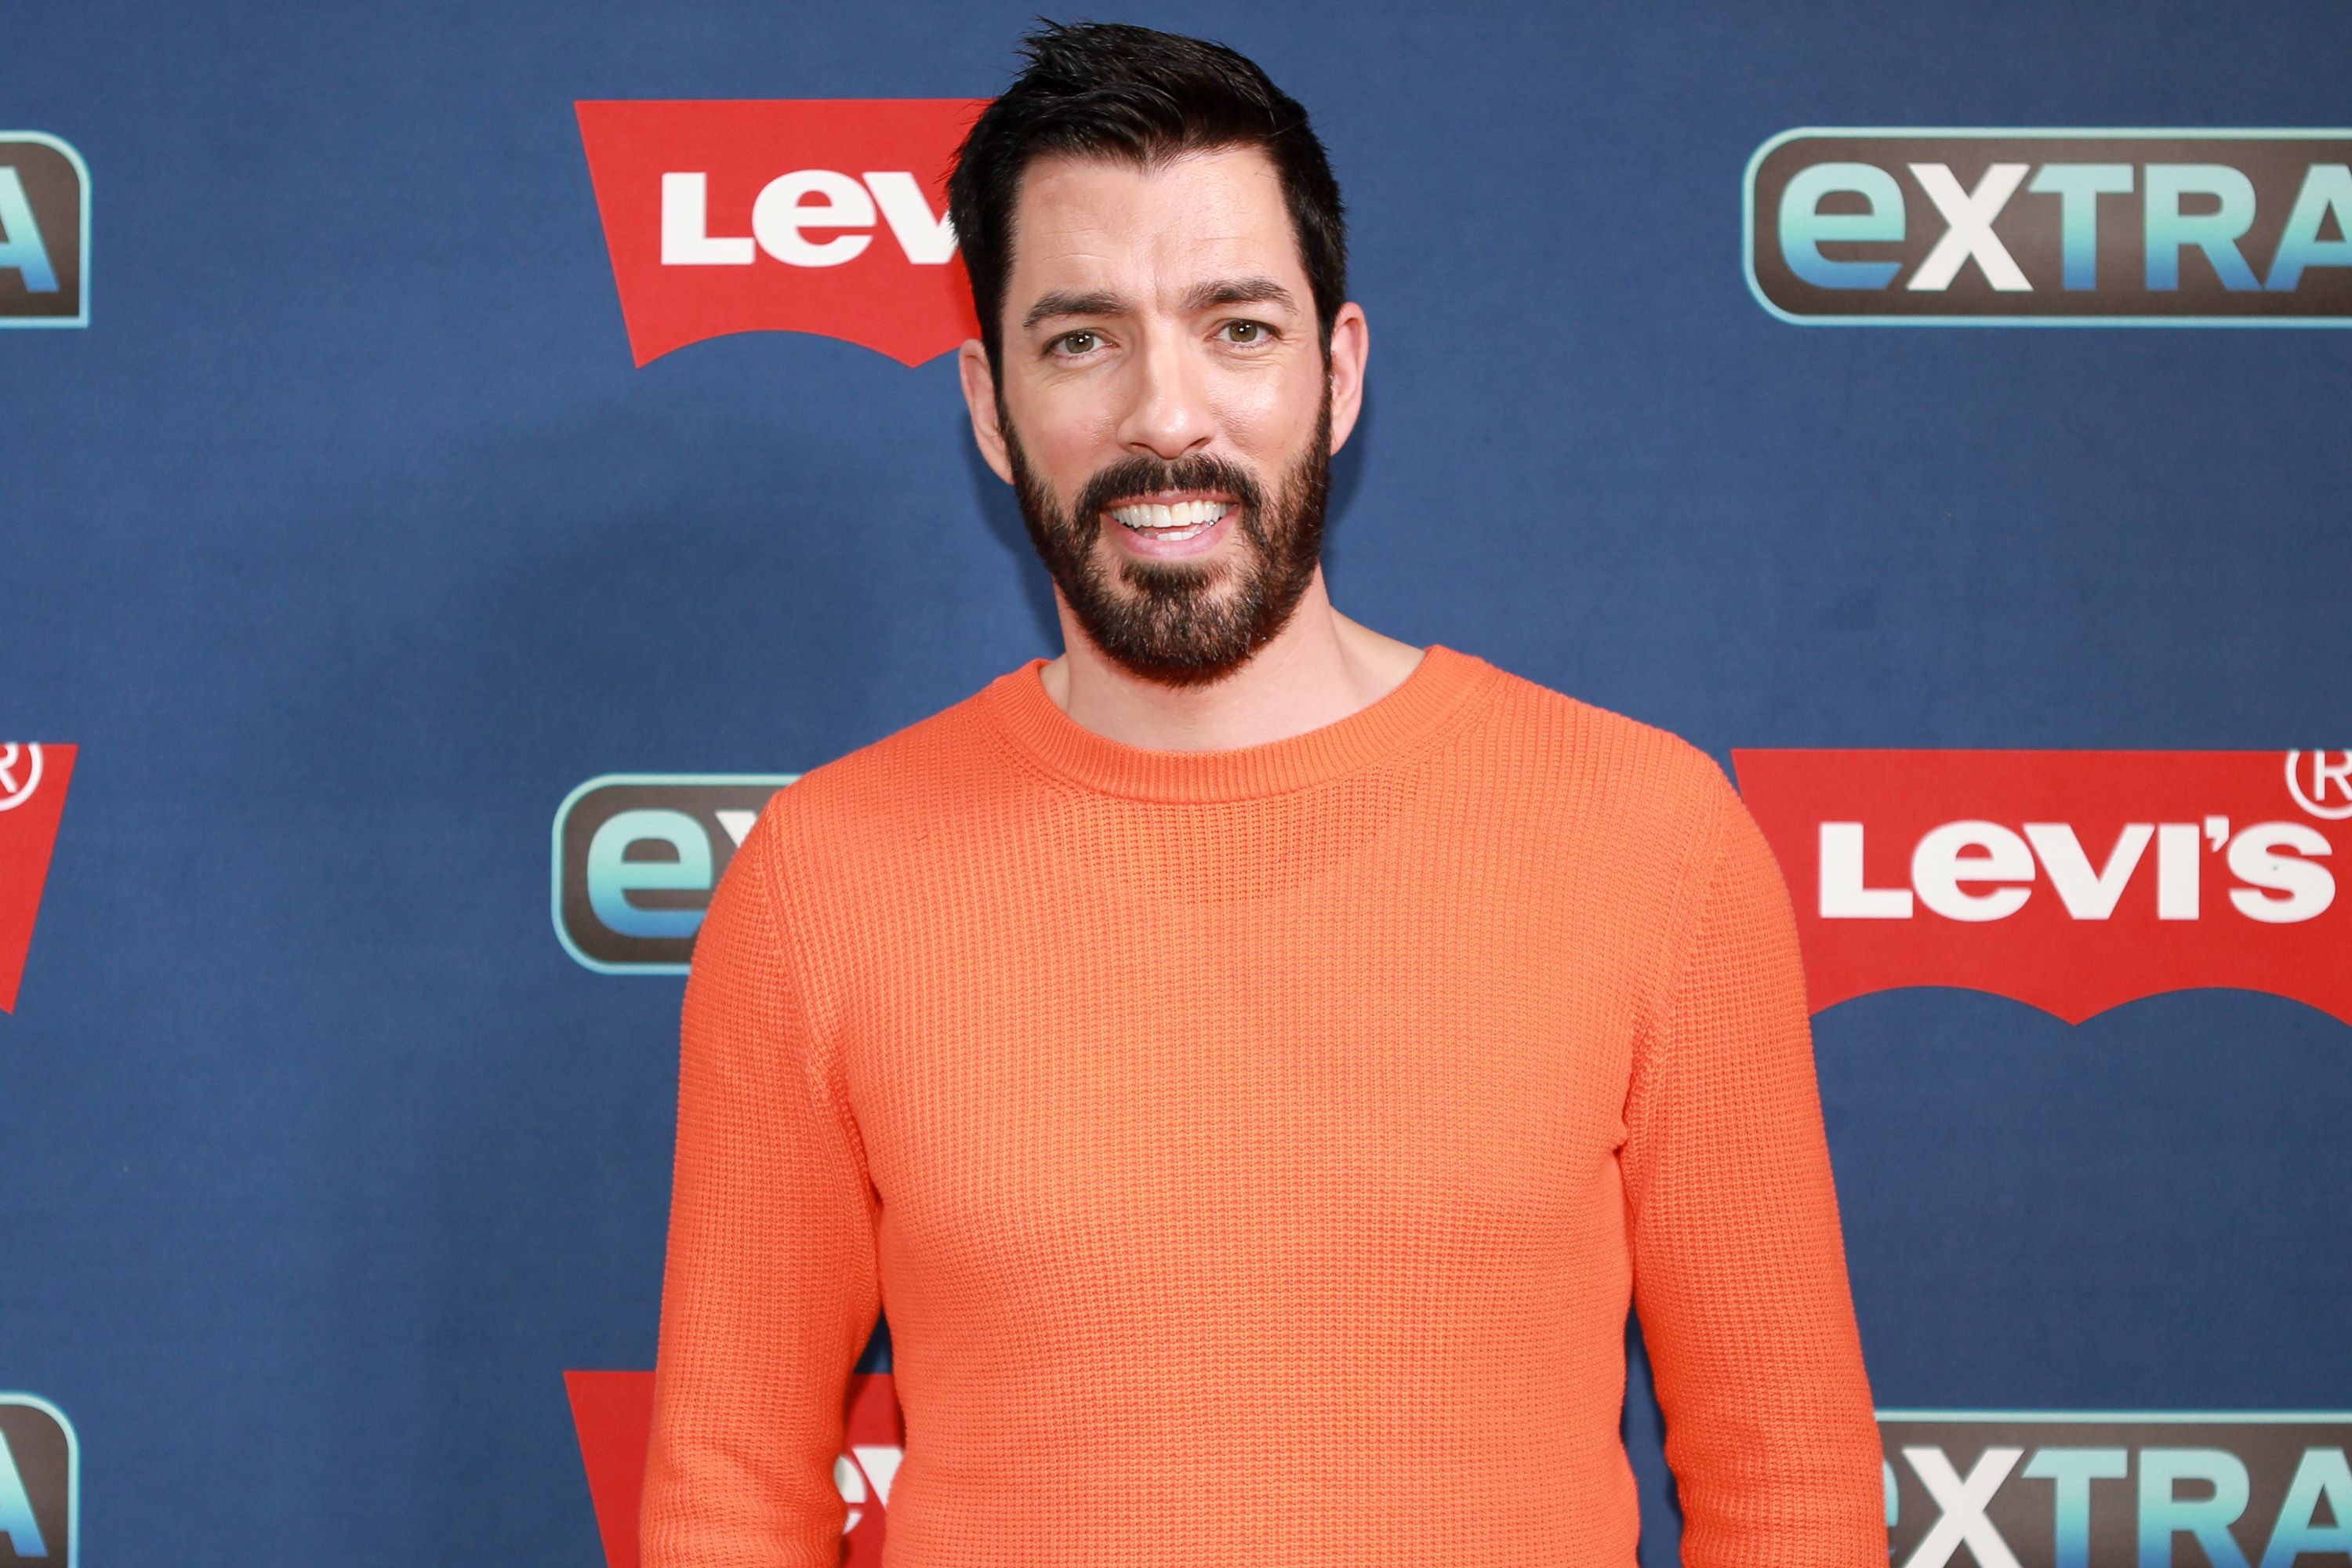 Jonathan Scott at The Levi's Store in New York City on September 10, 2019 | Source: Getty Images